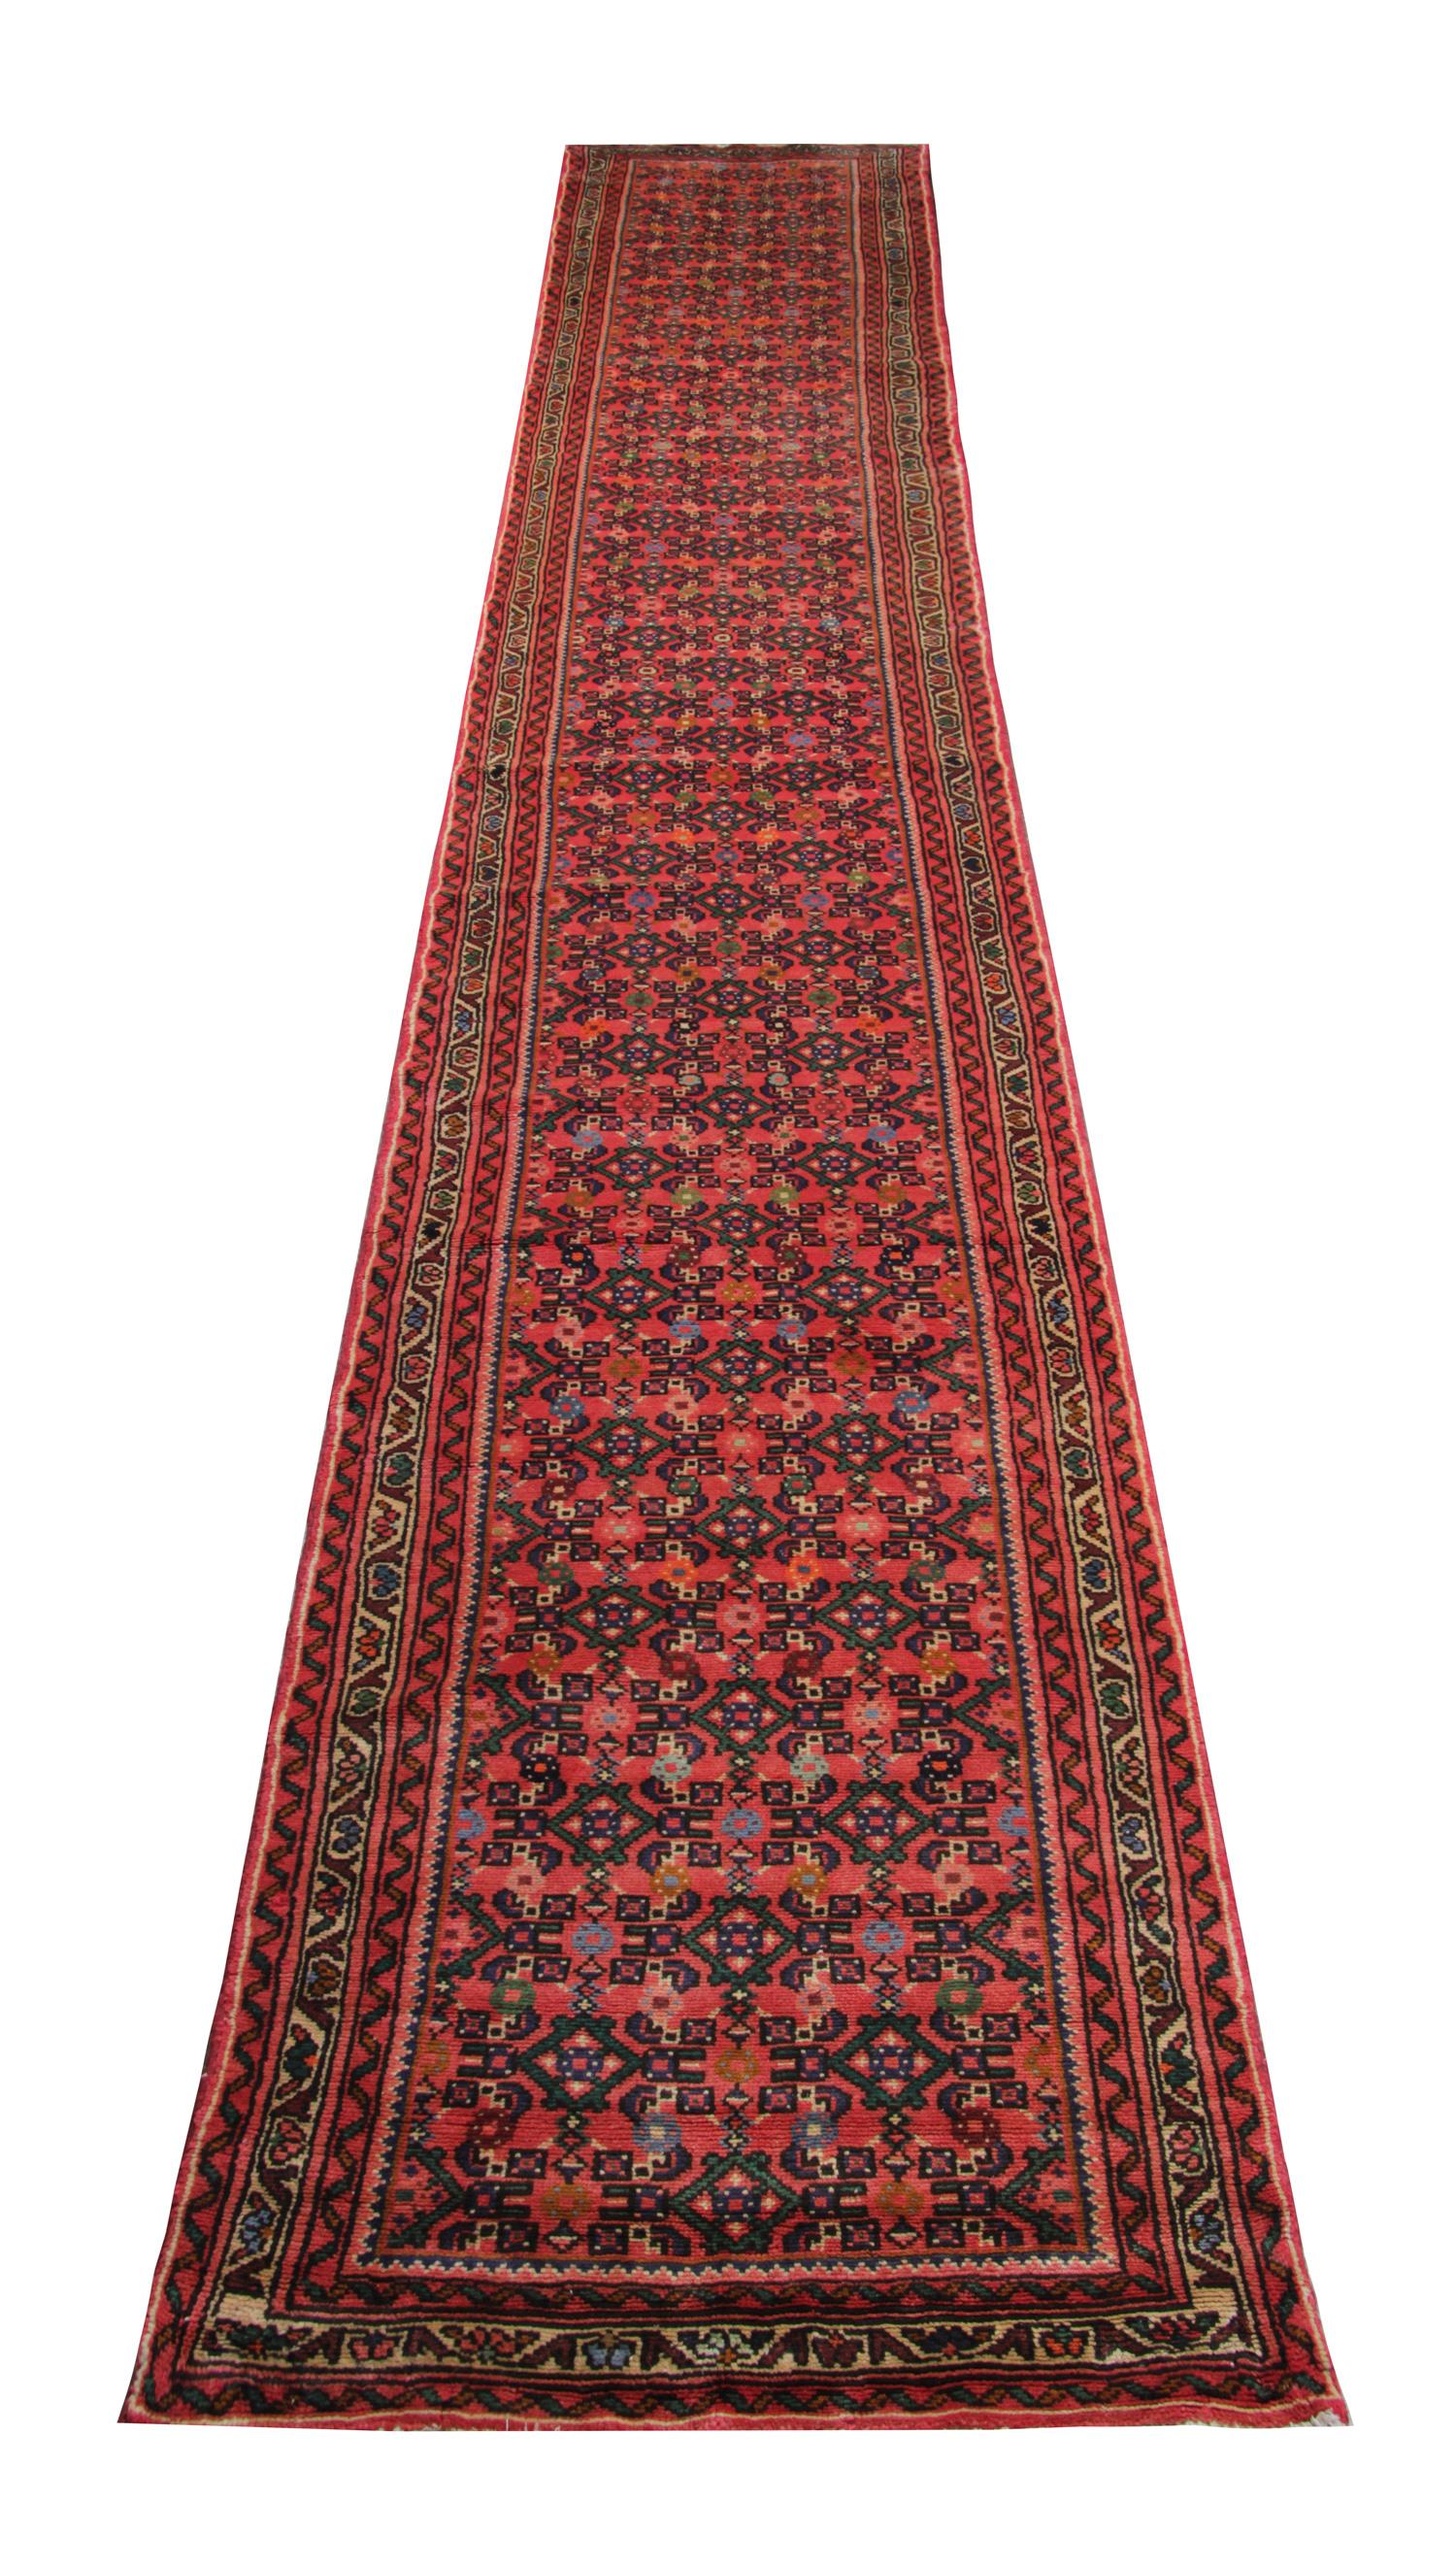 This elegant runner rug was woven by hand in 1950 and features a fantastic repeat pattern design. The central design features a red background with brown and cream accents that make up the design. The framing border pulls the whole design together